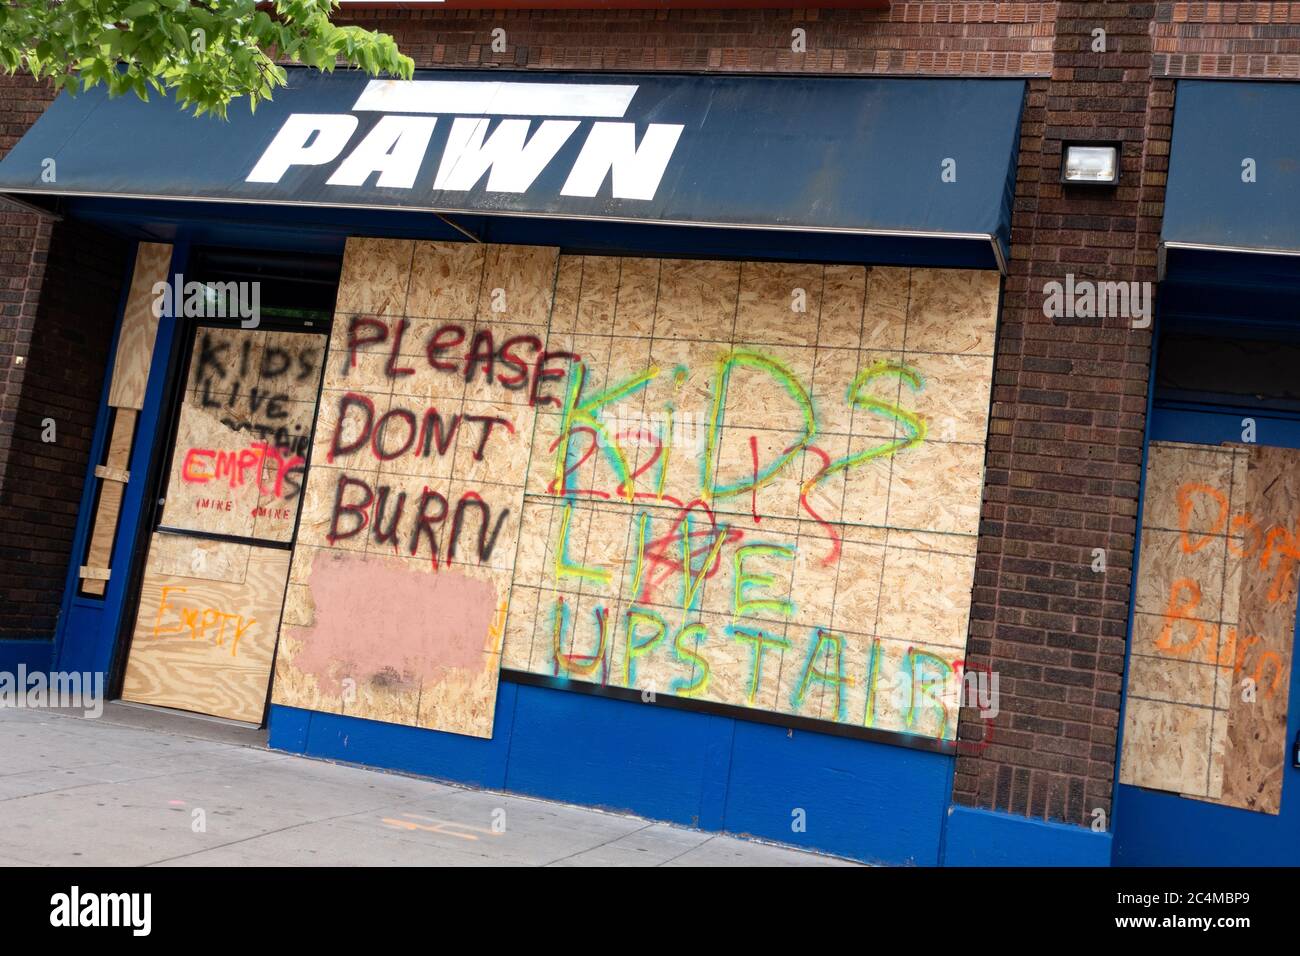 Pawn shop boarded up on Lake Street with 'kids Live upstairs' 'Please don't Burn' after George Floyd death and riots. Minneapolis Minnesota MN USA Stock Photo